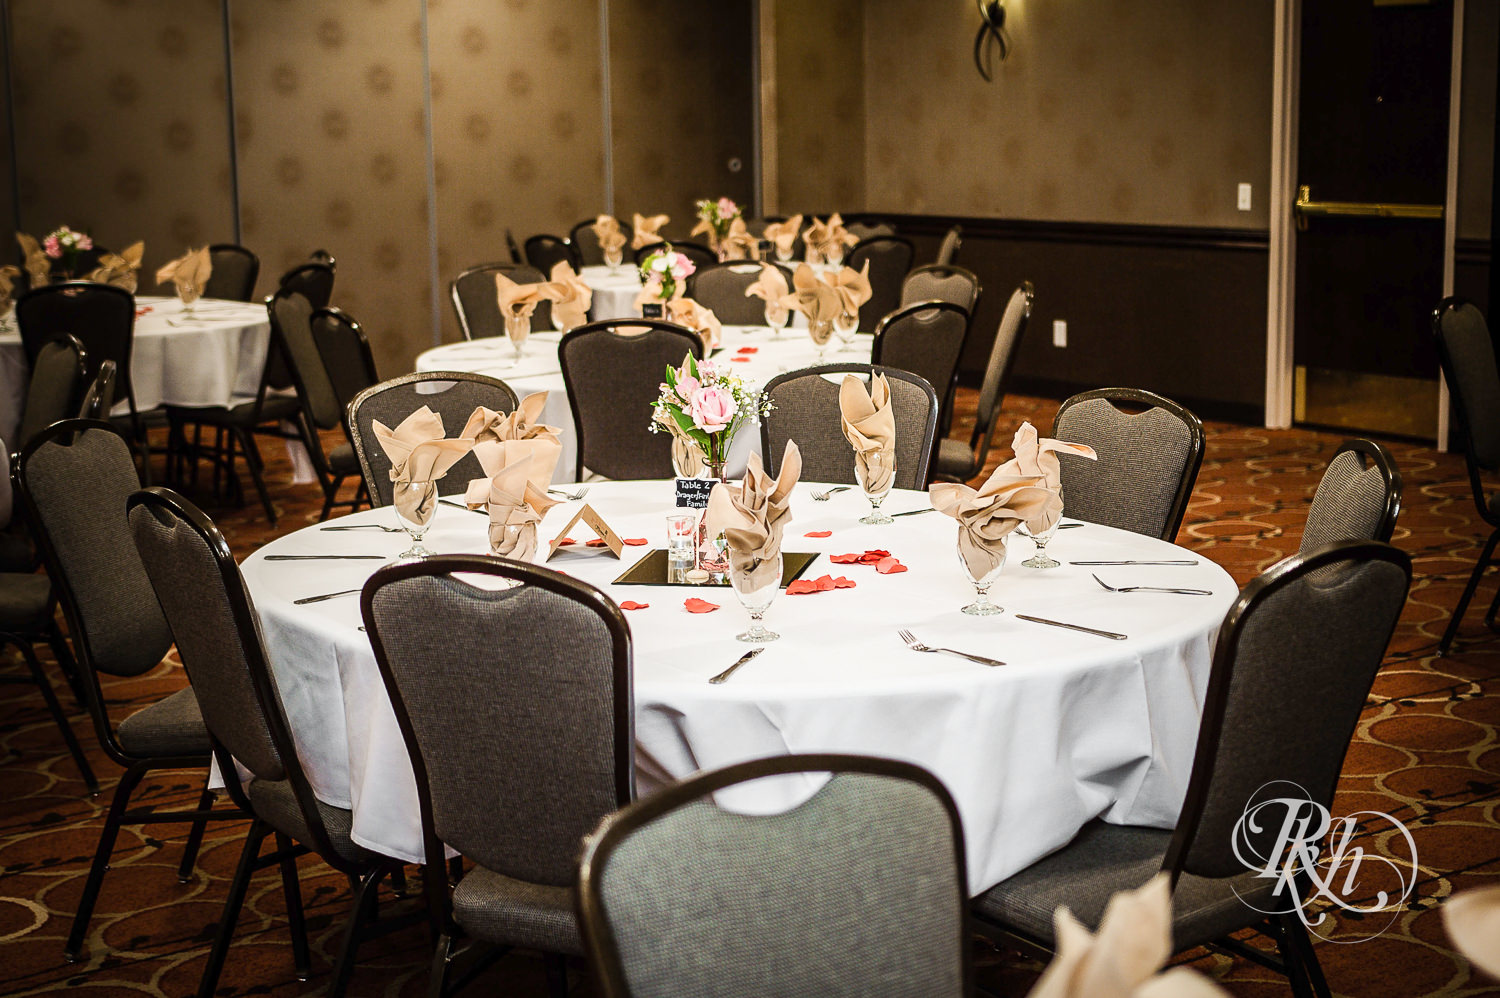 Indoor wedding reception setup at North Metro Event Center in Shoreview, Minnesota.